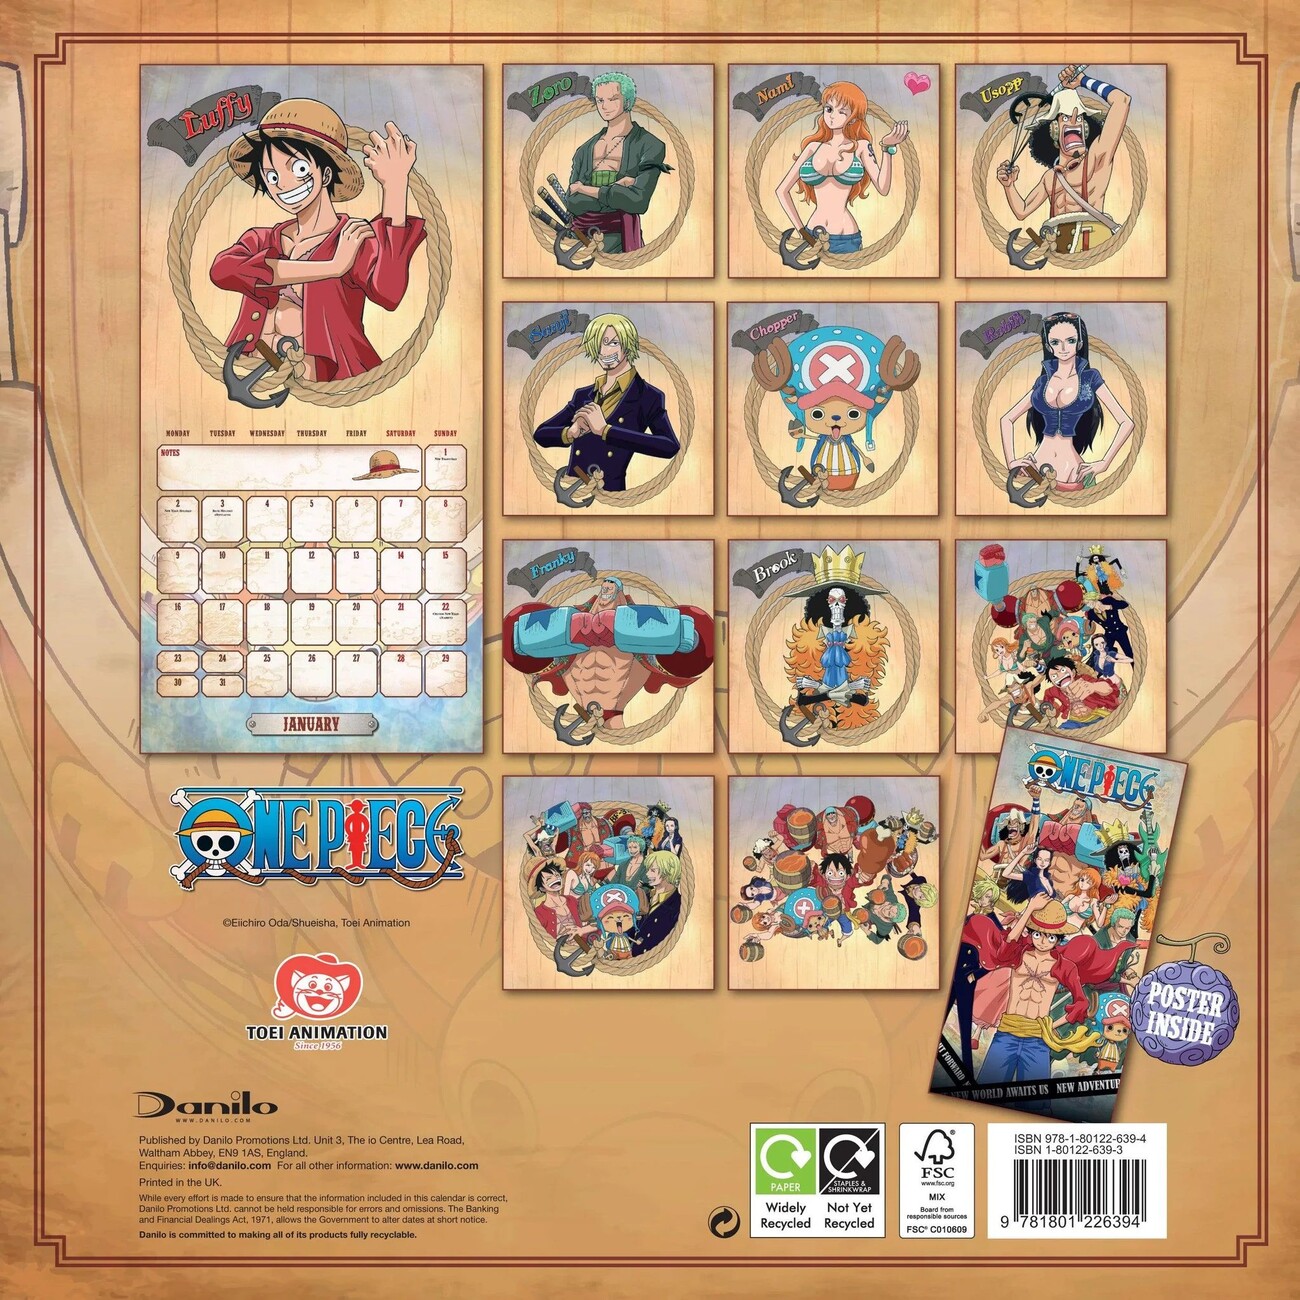 One Piece Anime - Wall Calendars 2024 | Buy at